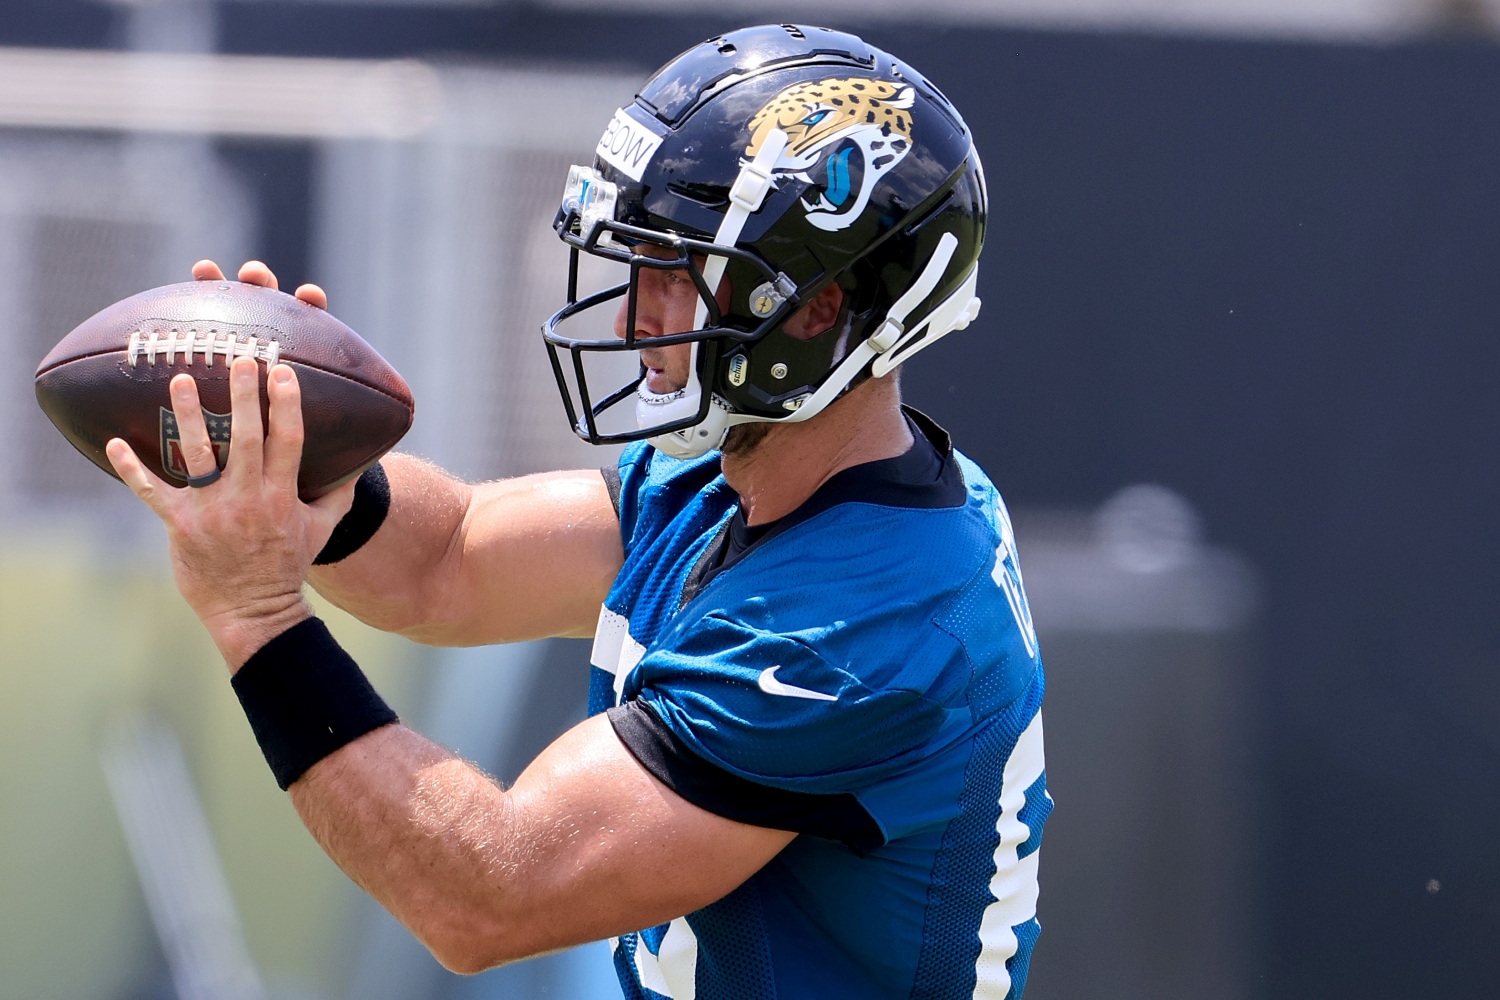 Jacksonville Jaguars tight end Tim Tebow catches a ball during practice.